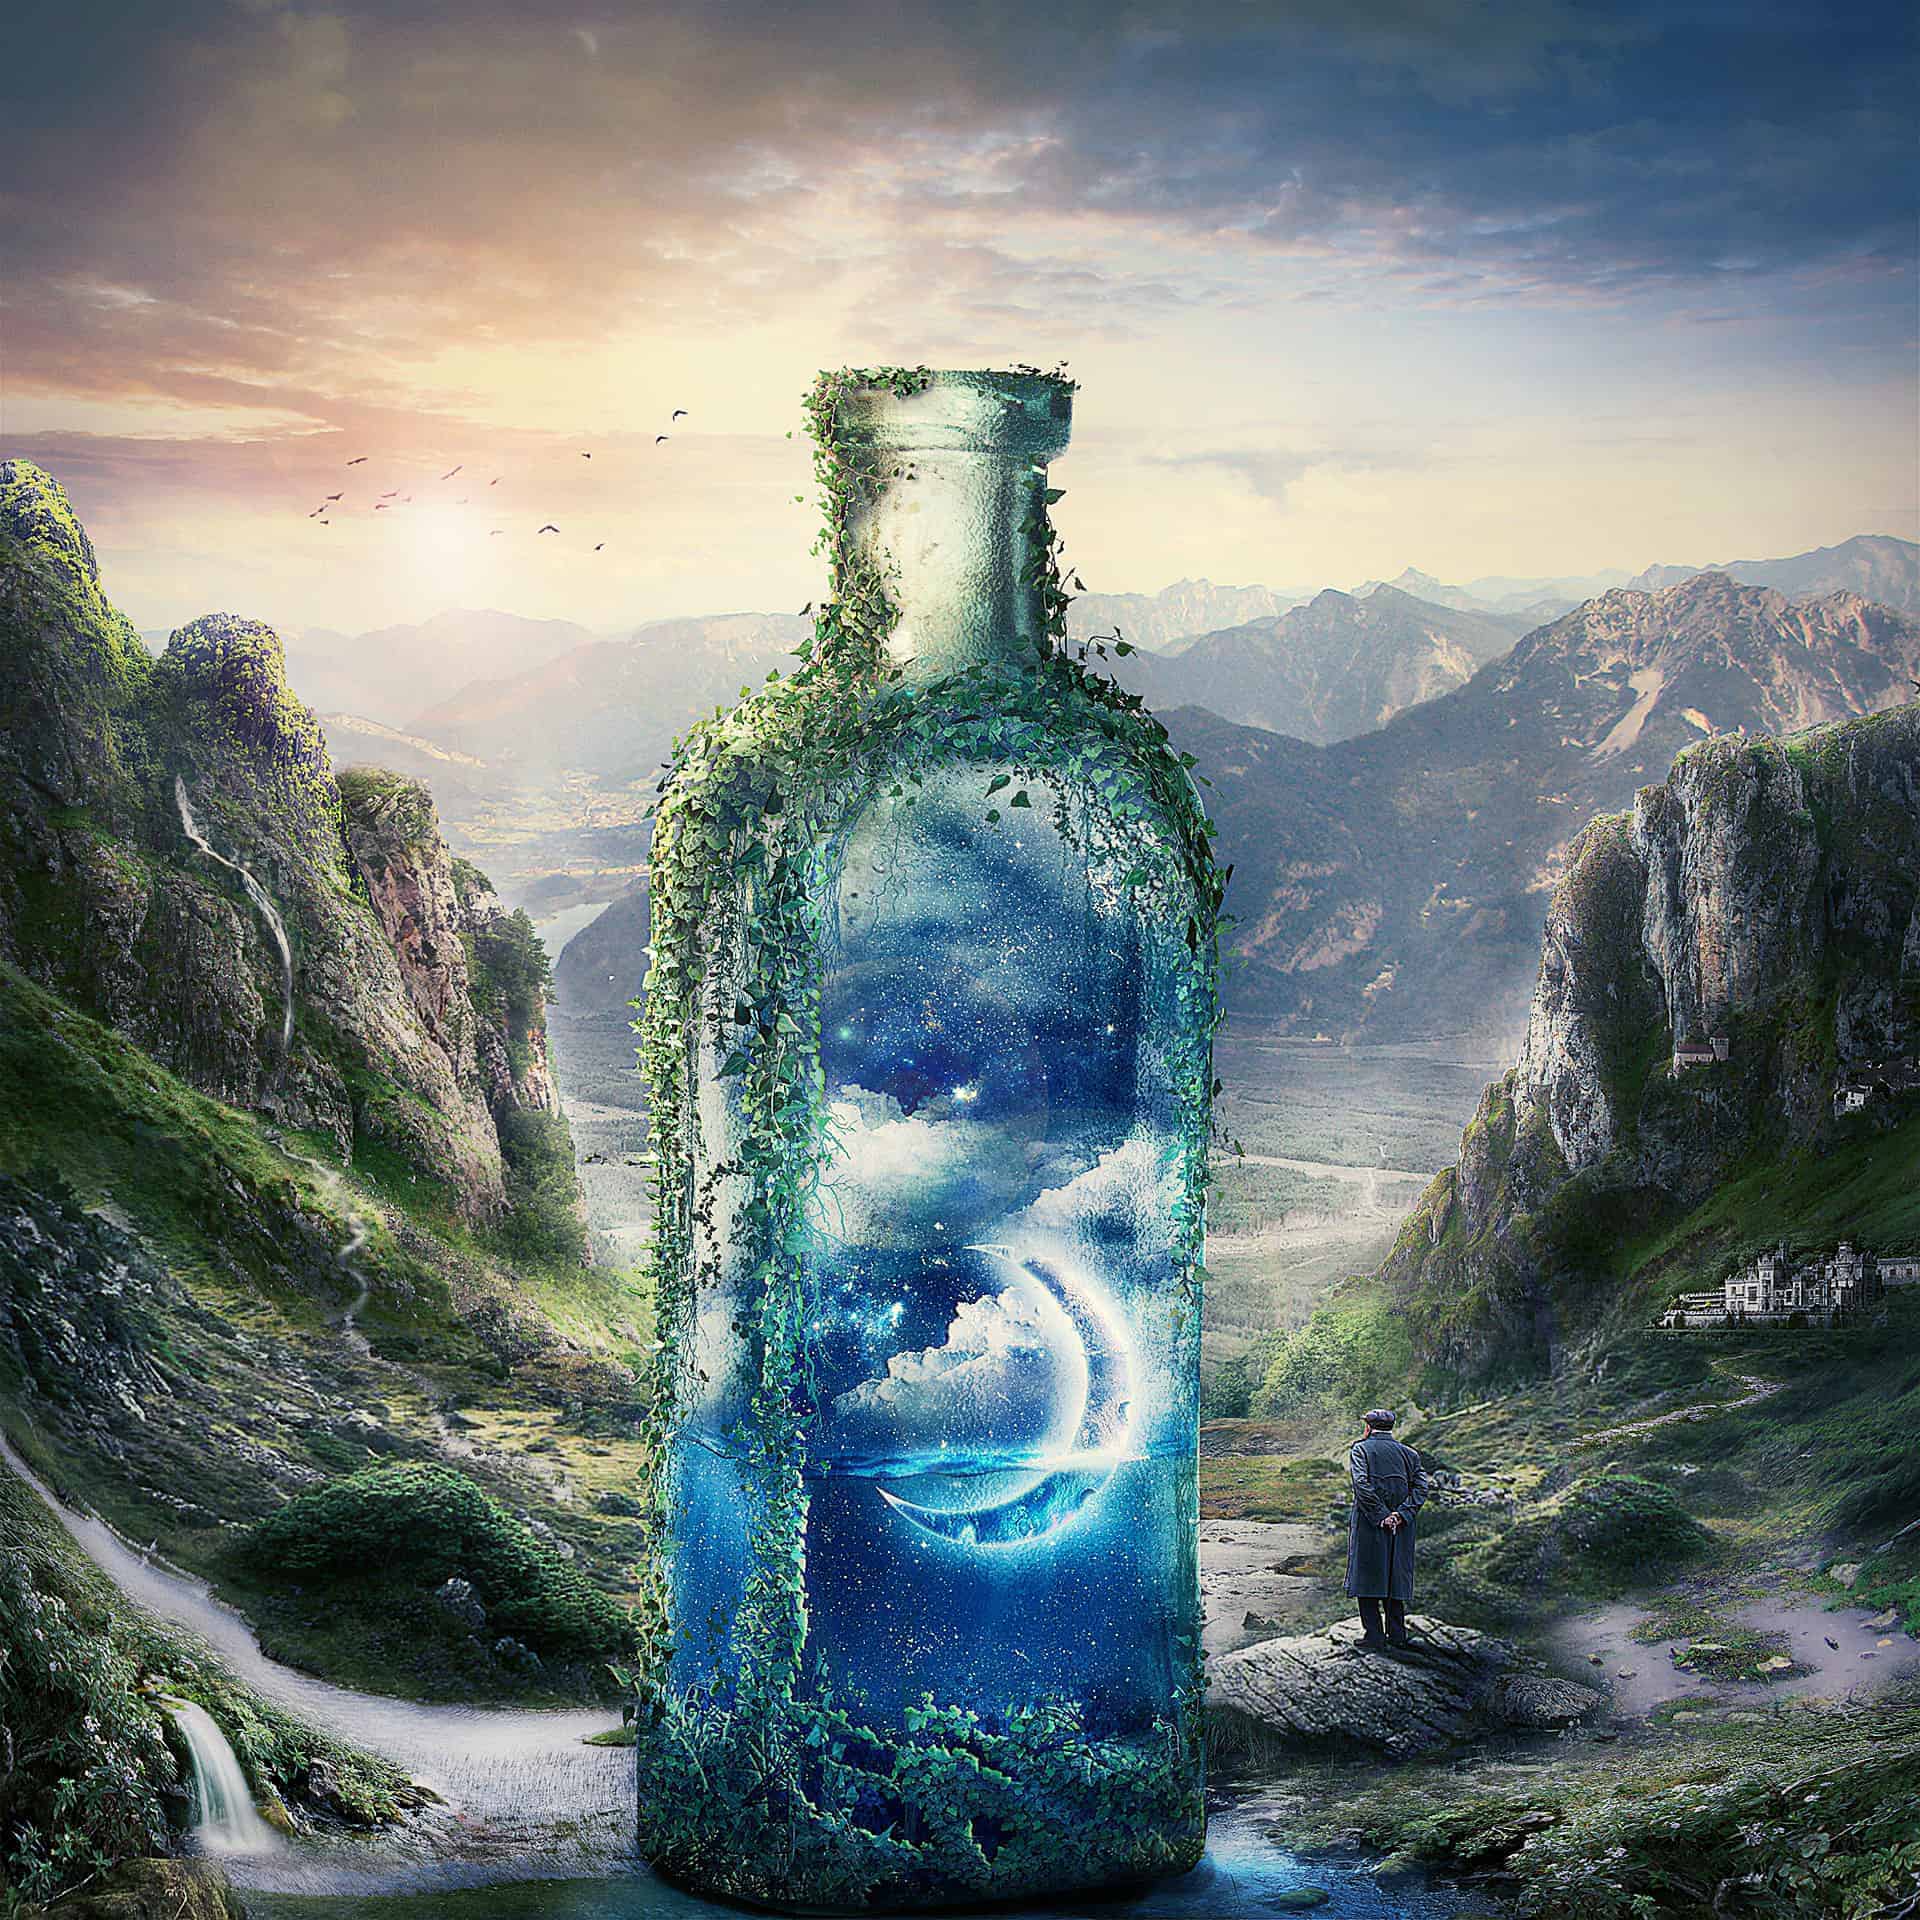 Create a Surreal and Magical Dream Bottle Landscape